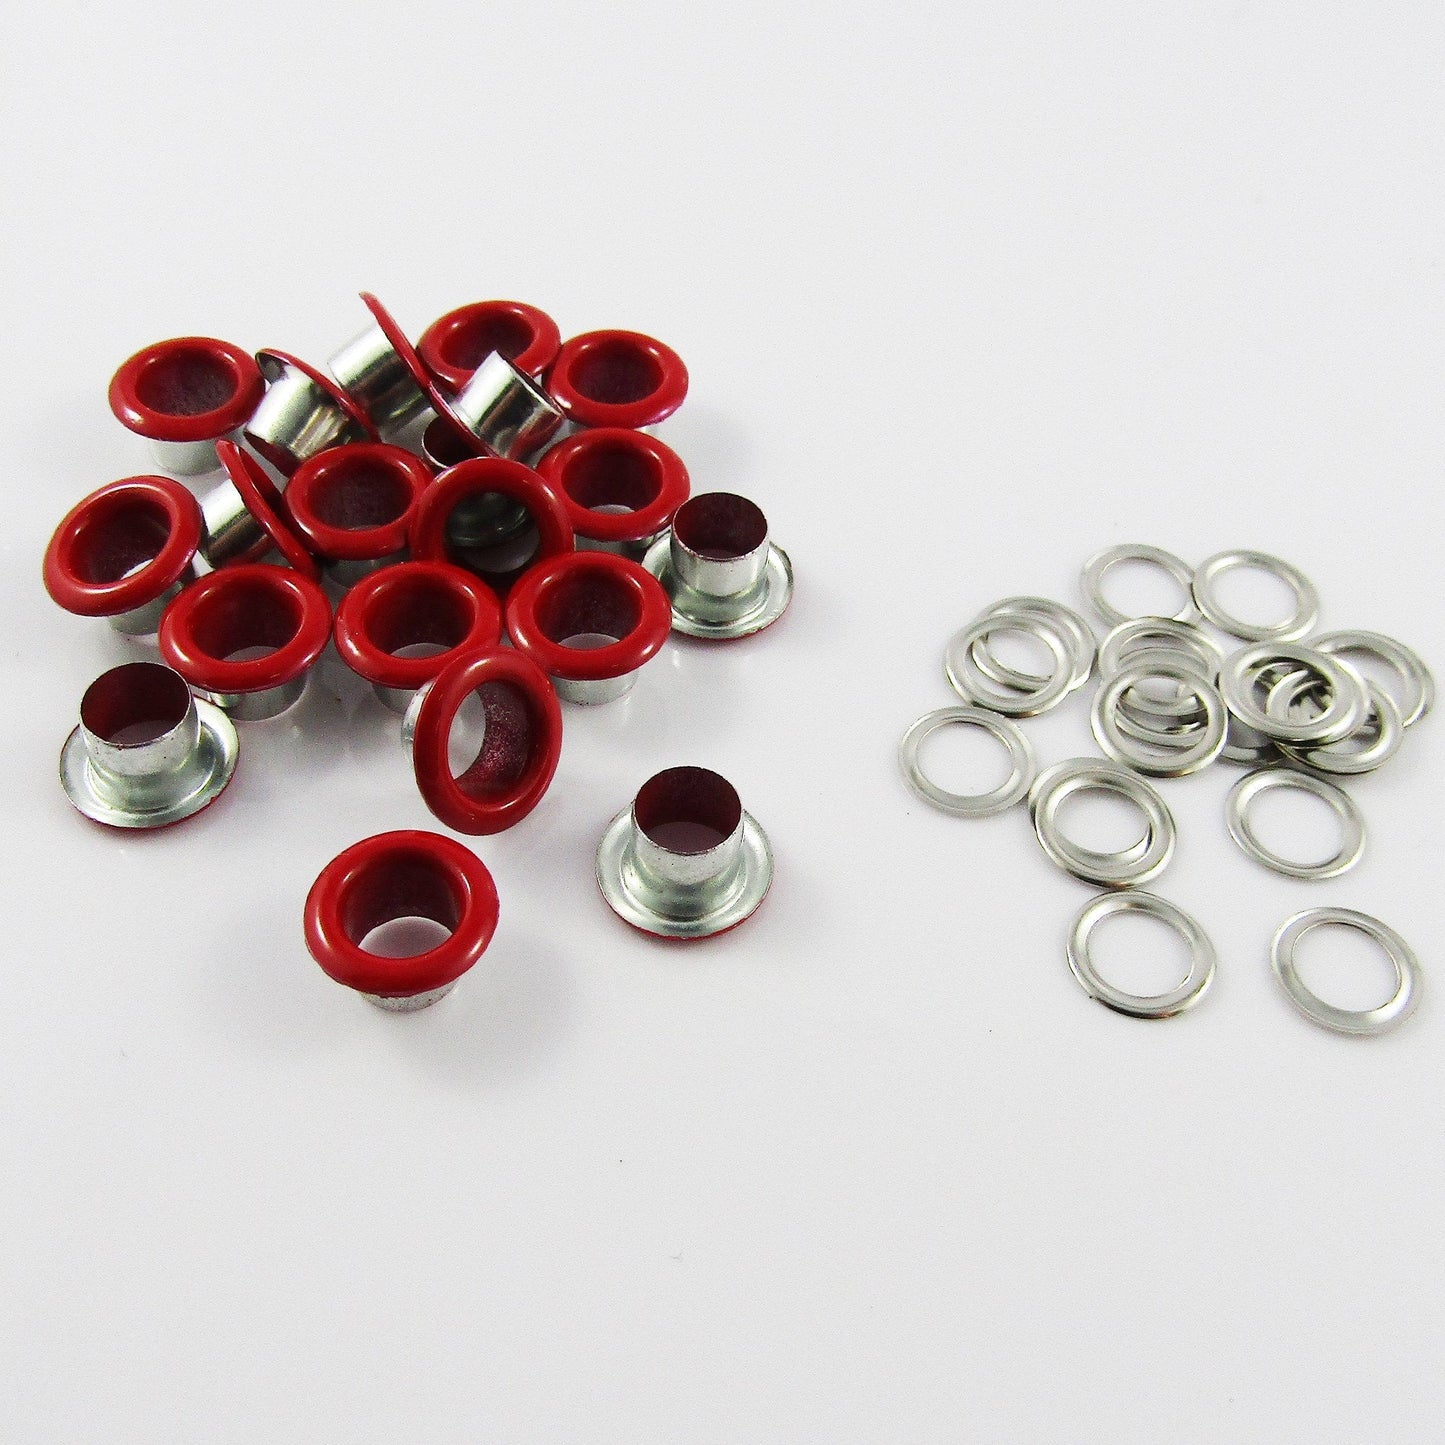 50pcs Red Eyelet Finding 10.5mm Hole 6mm Craft Cards Junk Journals etc